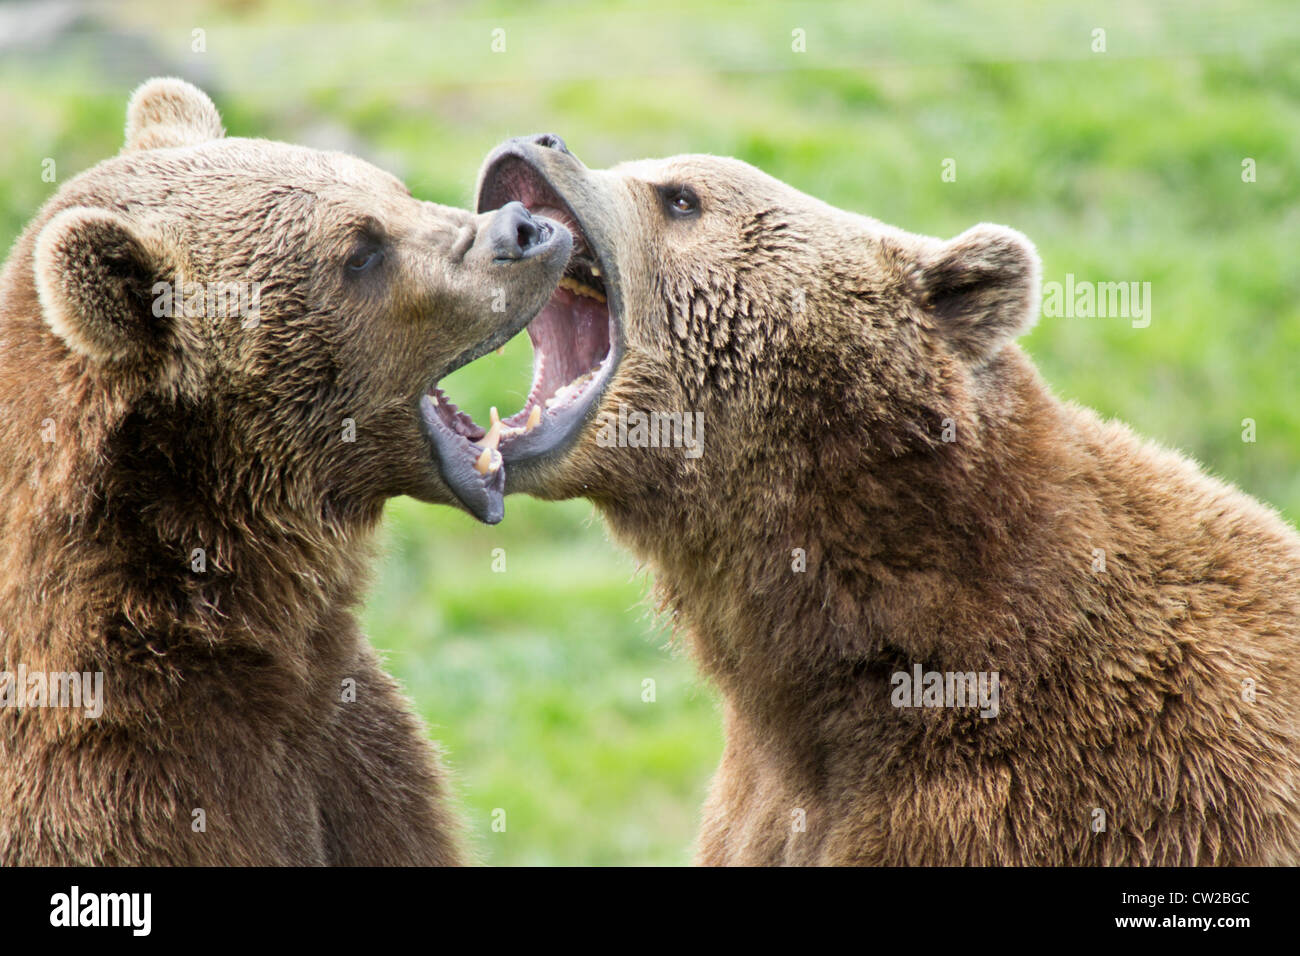 Two Brown Bears playfully fighting Stock Photo